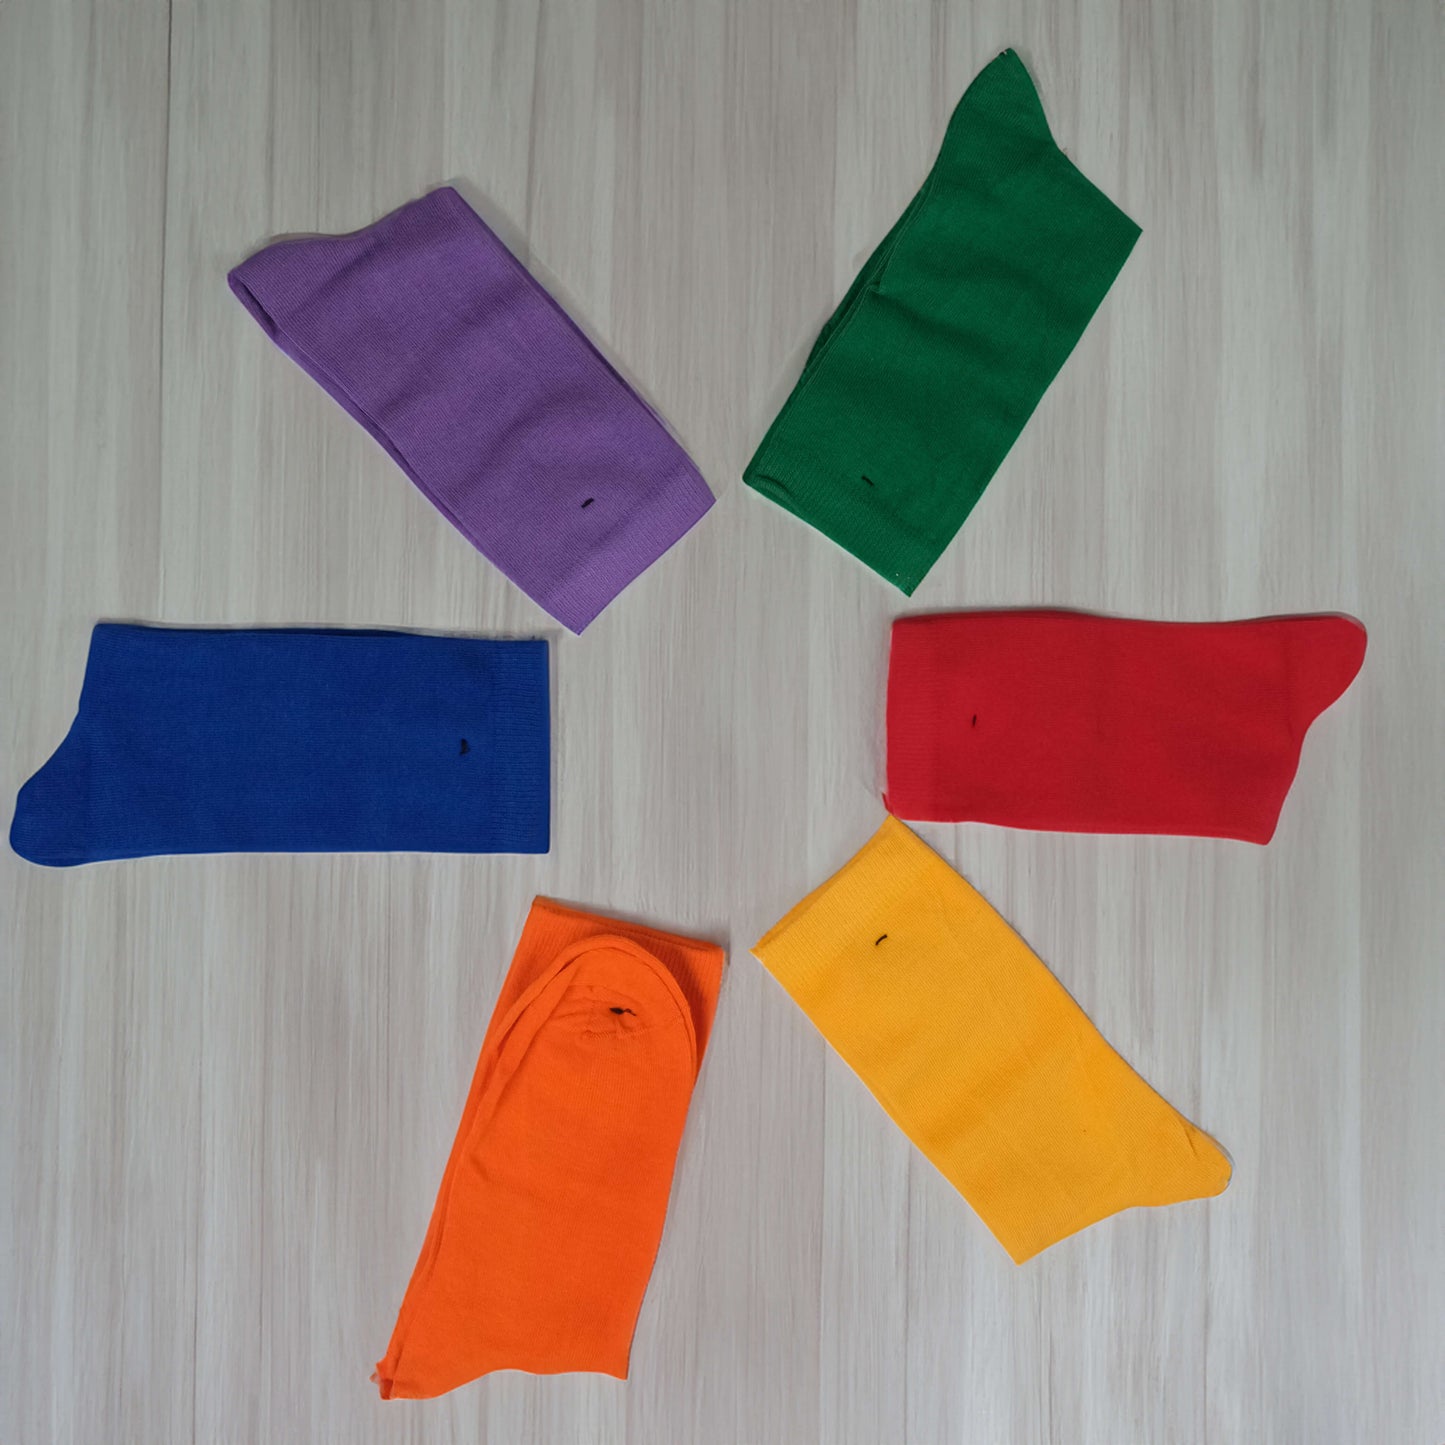 Six-pair pack of vibrant solid pattern cotton socks in assorted colors. Includes hues like navy blue, red, green, yellow, purple, and pink. A stylish and comfortable addition to your everyday wardrobe.